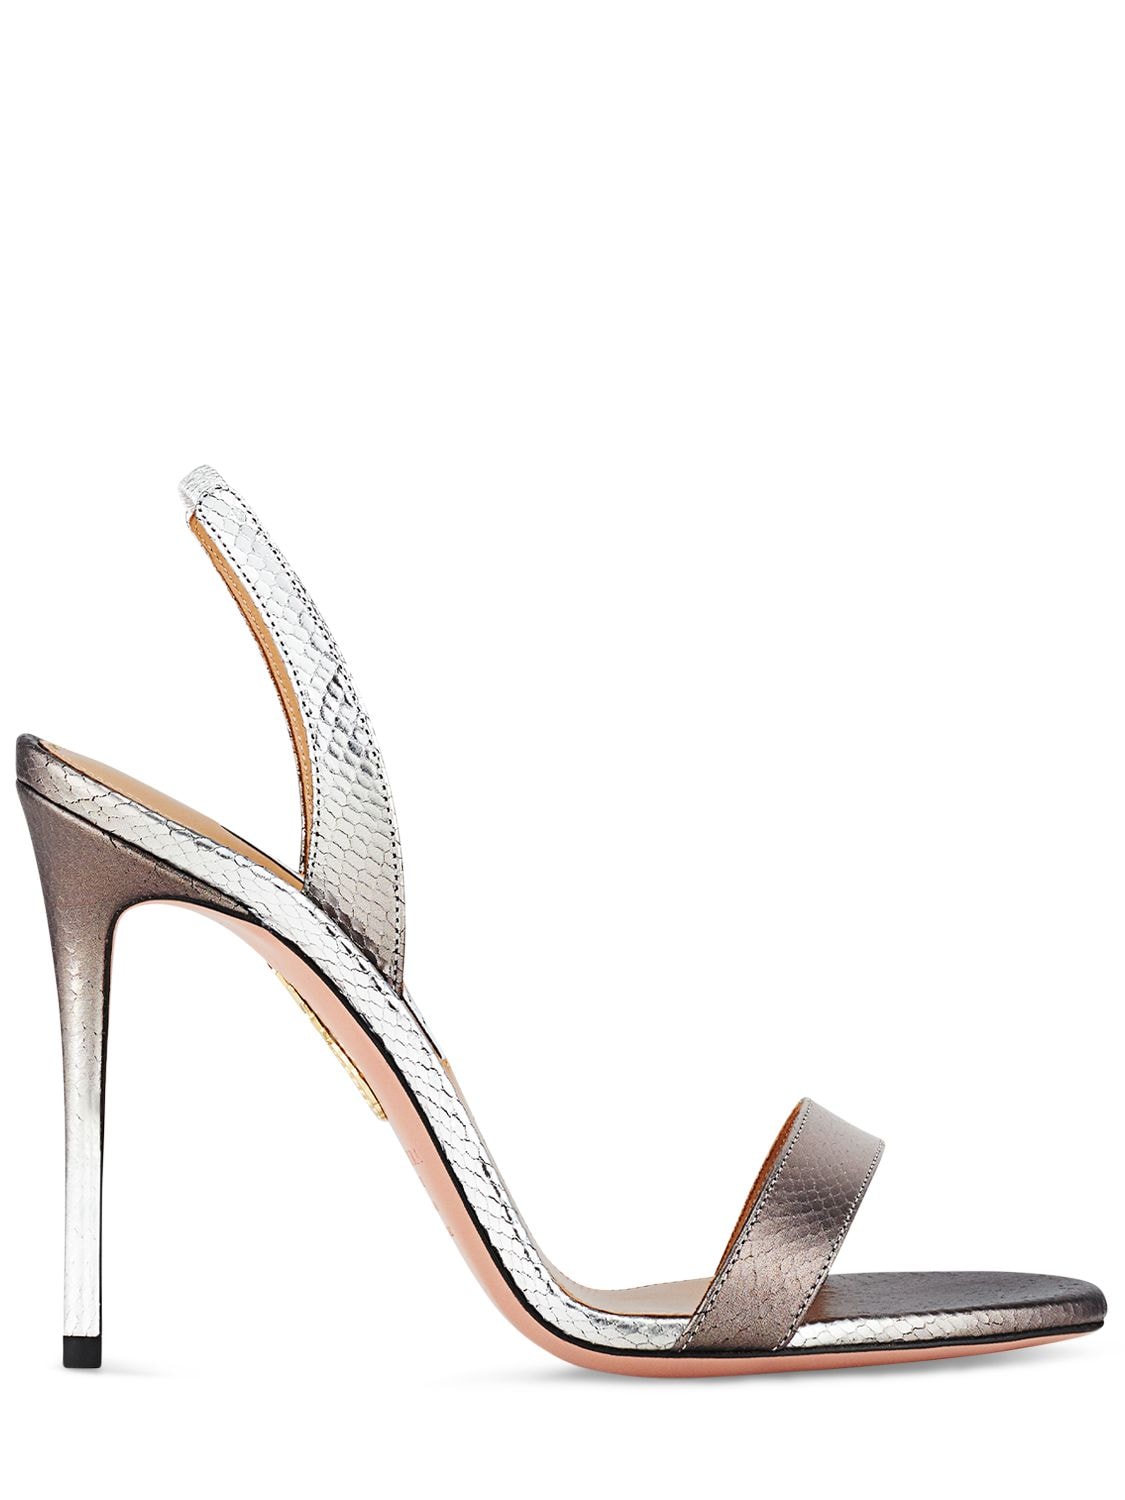 Image of 105mm So Nude Python Print Sandals